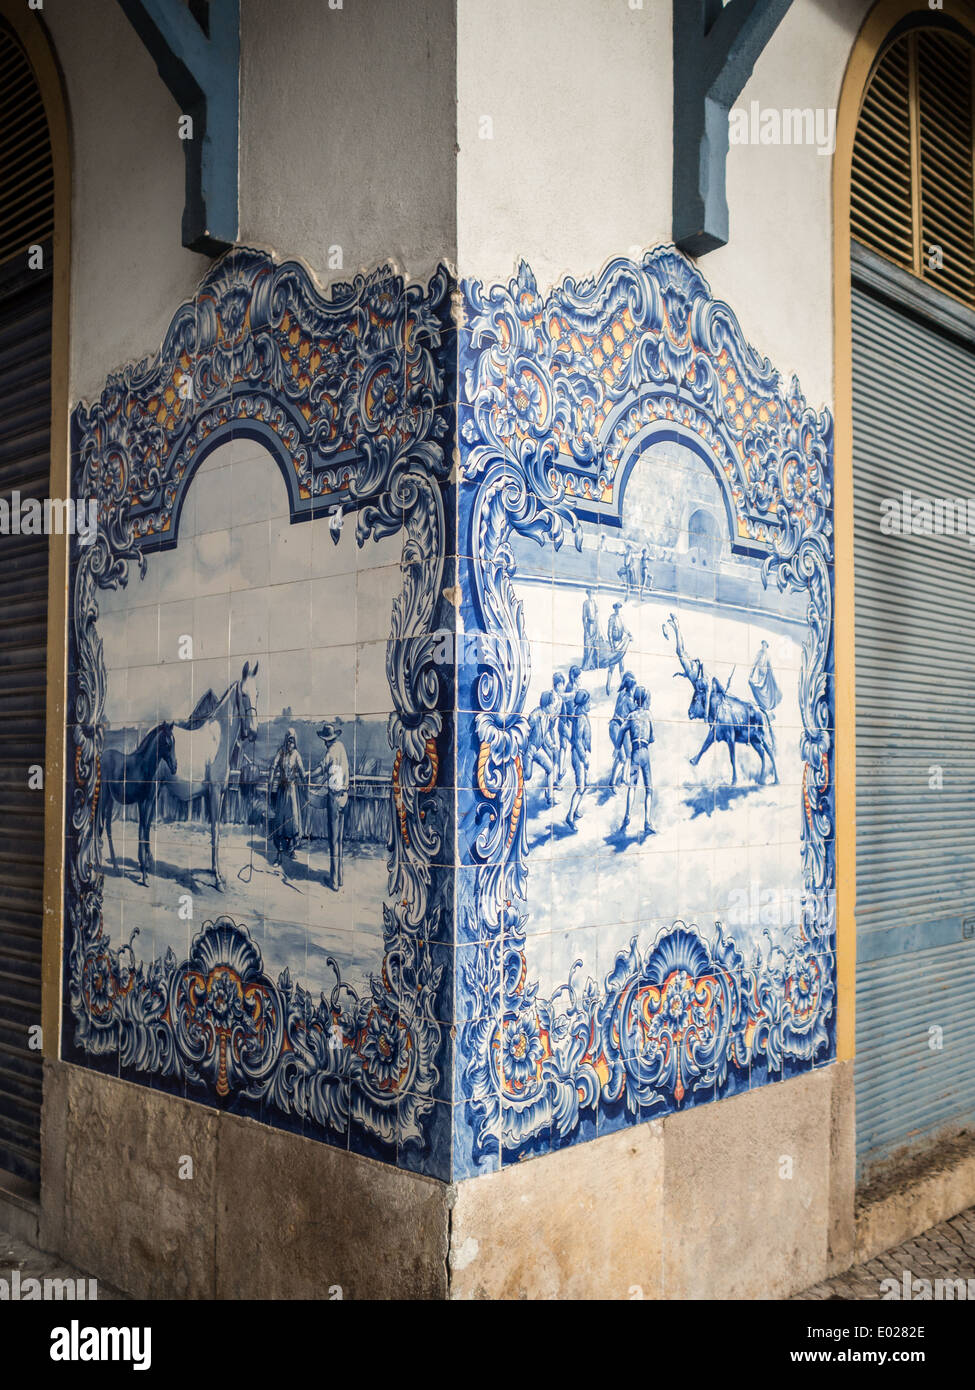 Santarem market building decorated with blue and white tiles Stock Photo